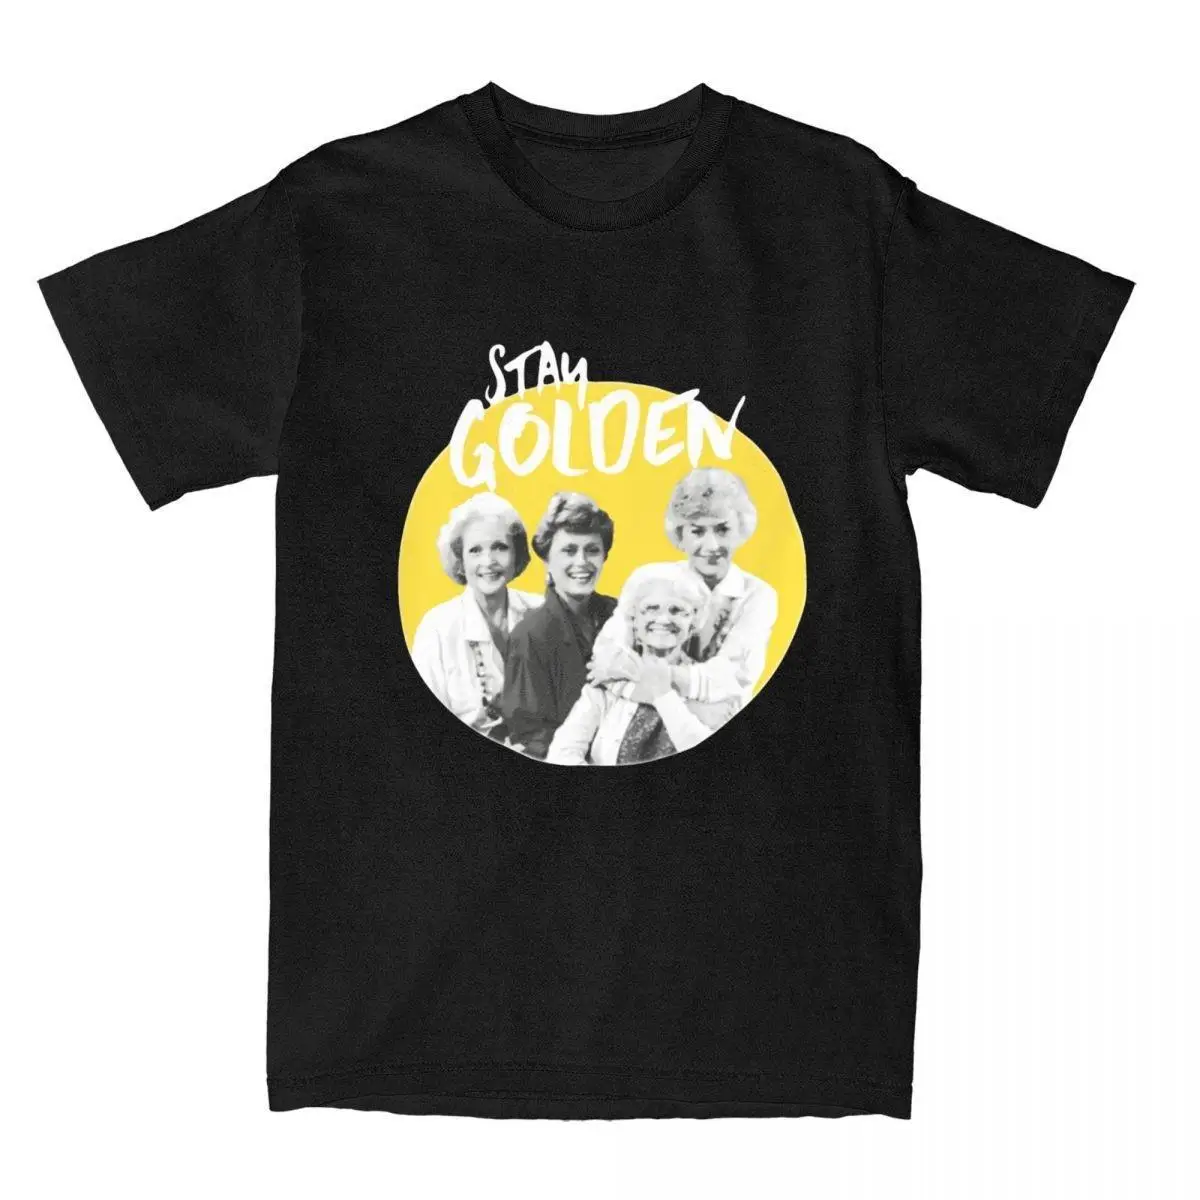 Stay Golden Betty White T-Shirts for Men Golden Girls Tv 100% Cotton Tee Shirt Round Neck Short Sleeve T Shirt Graphic Clothes